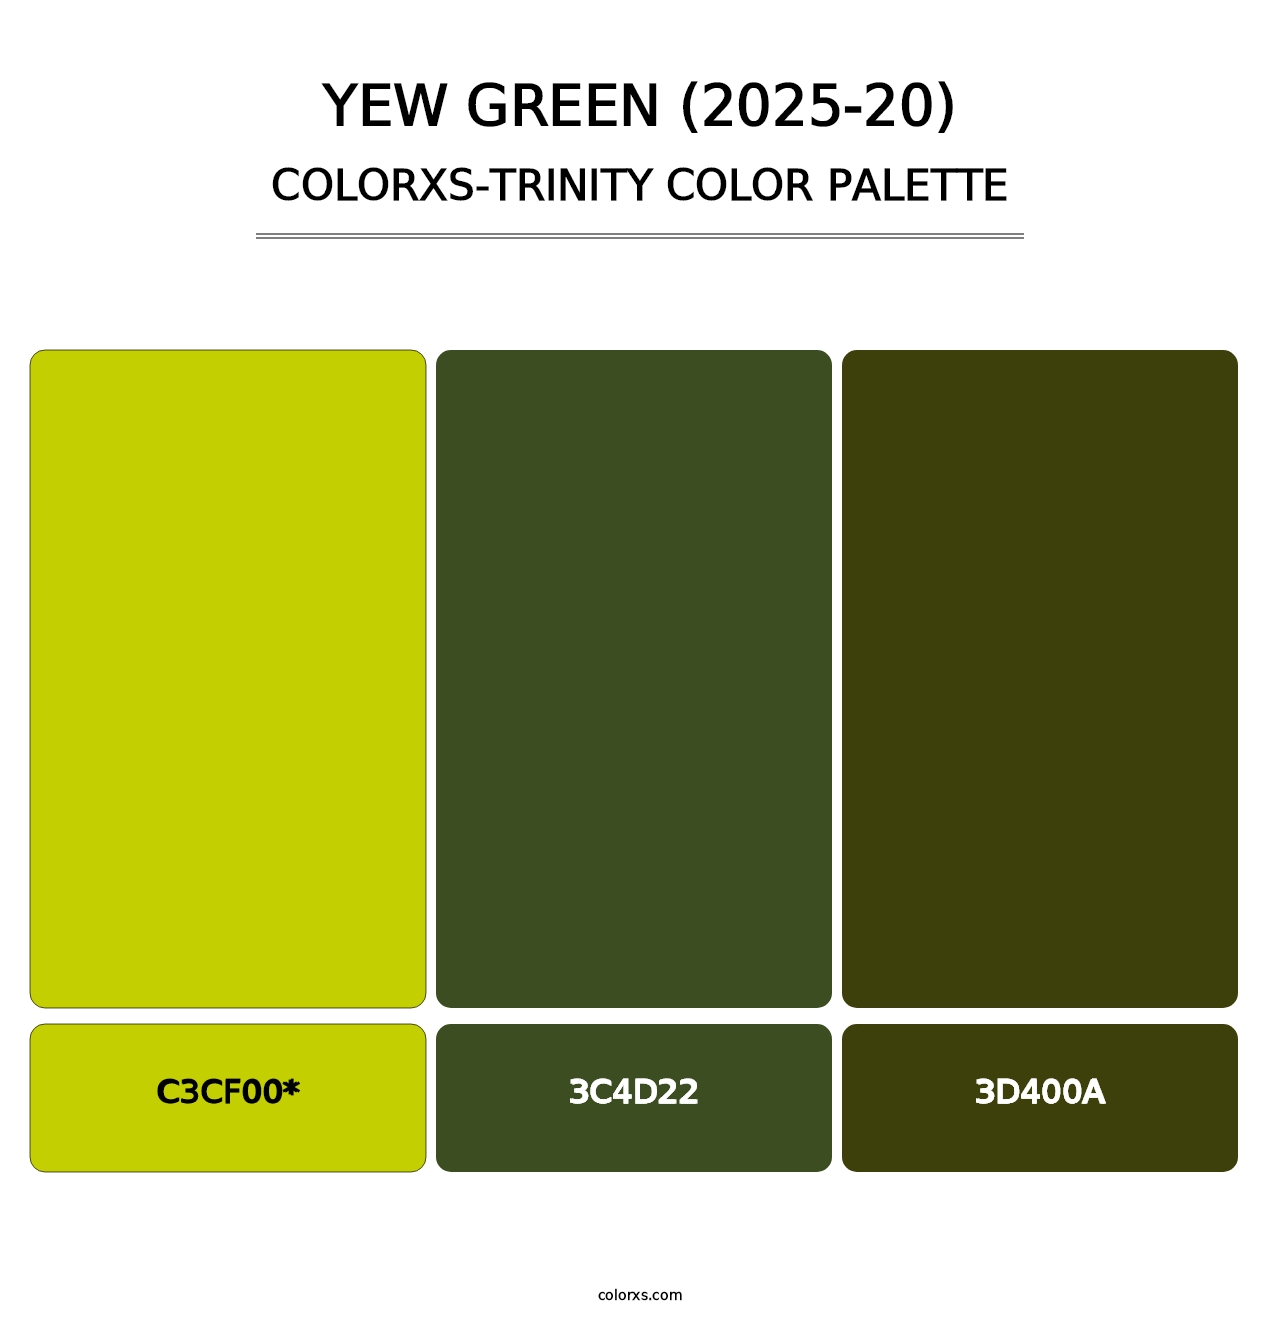 Yew Green (2025-20) - Colorxs Trinity Palette